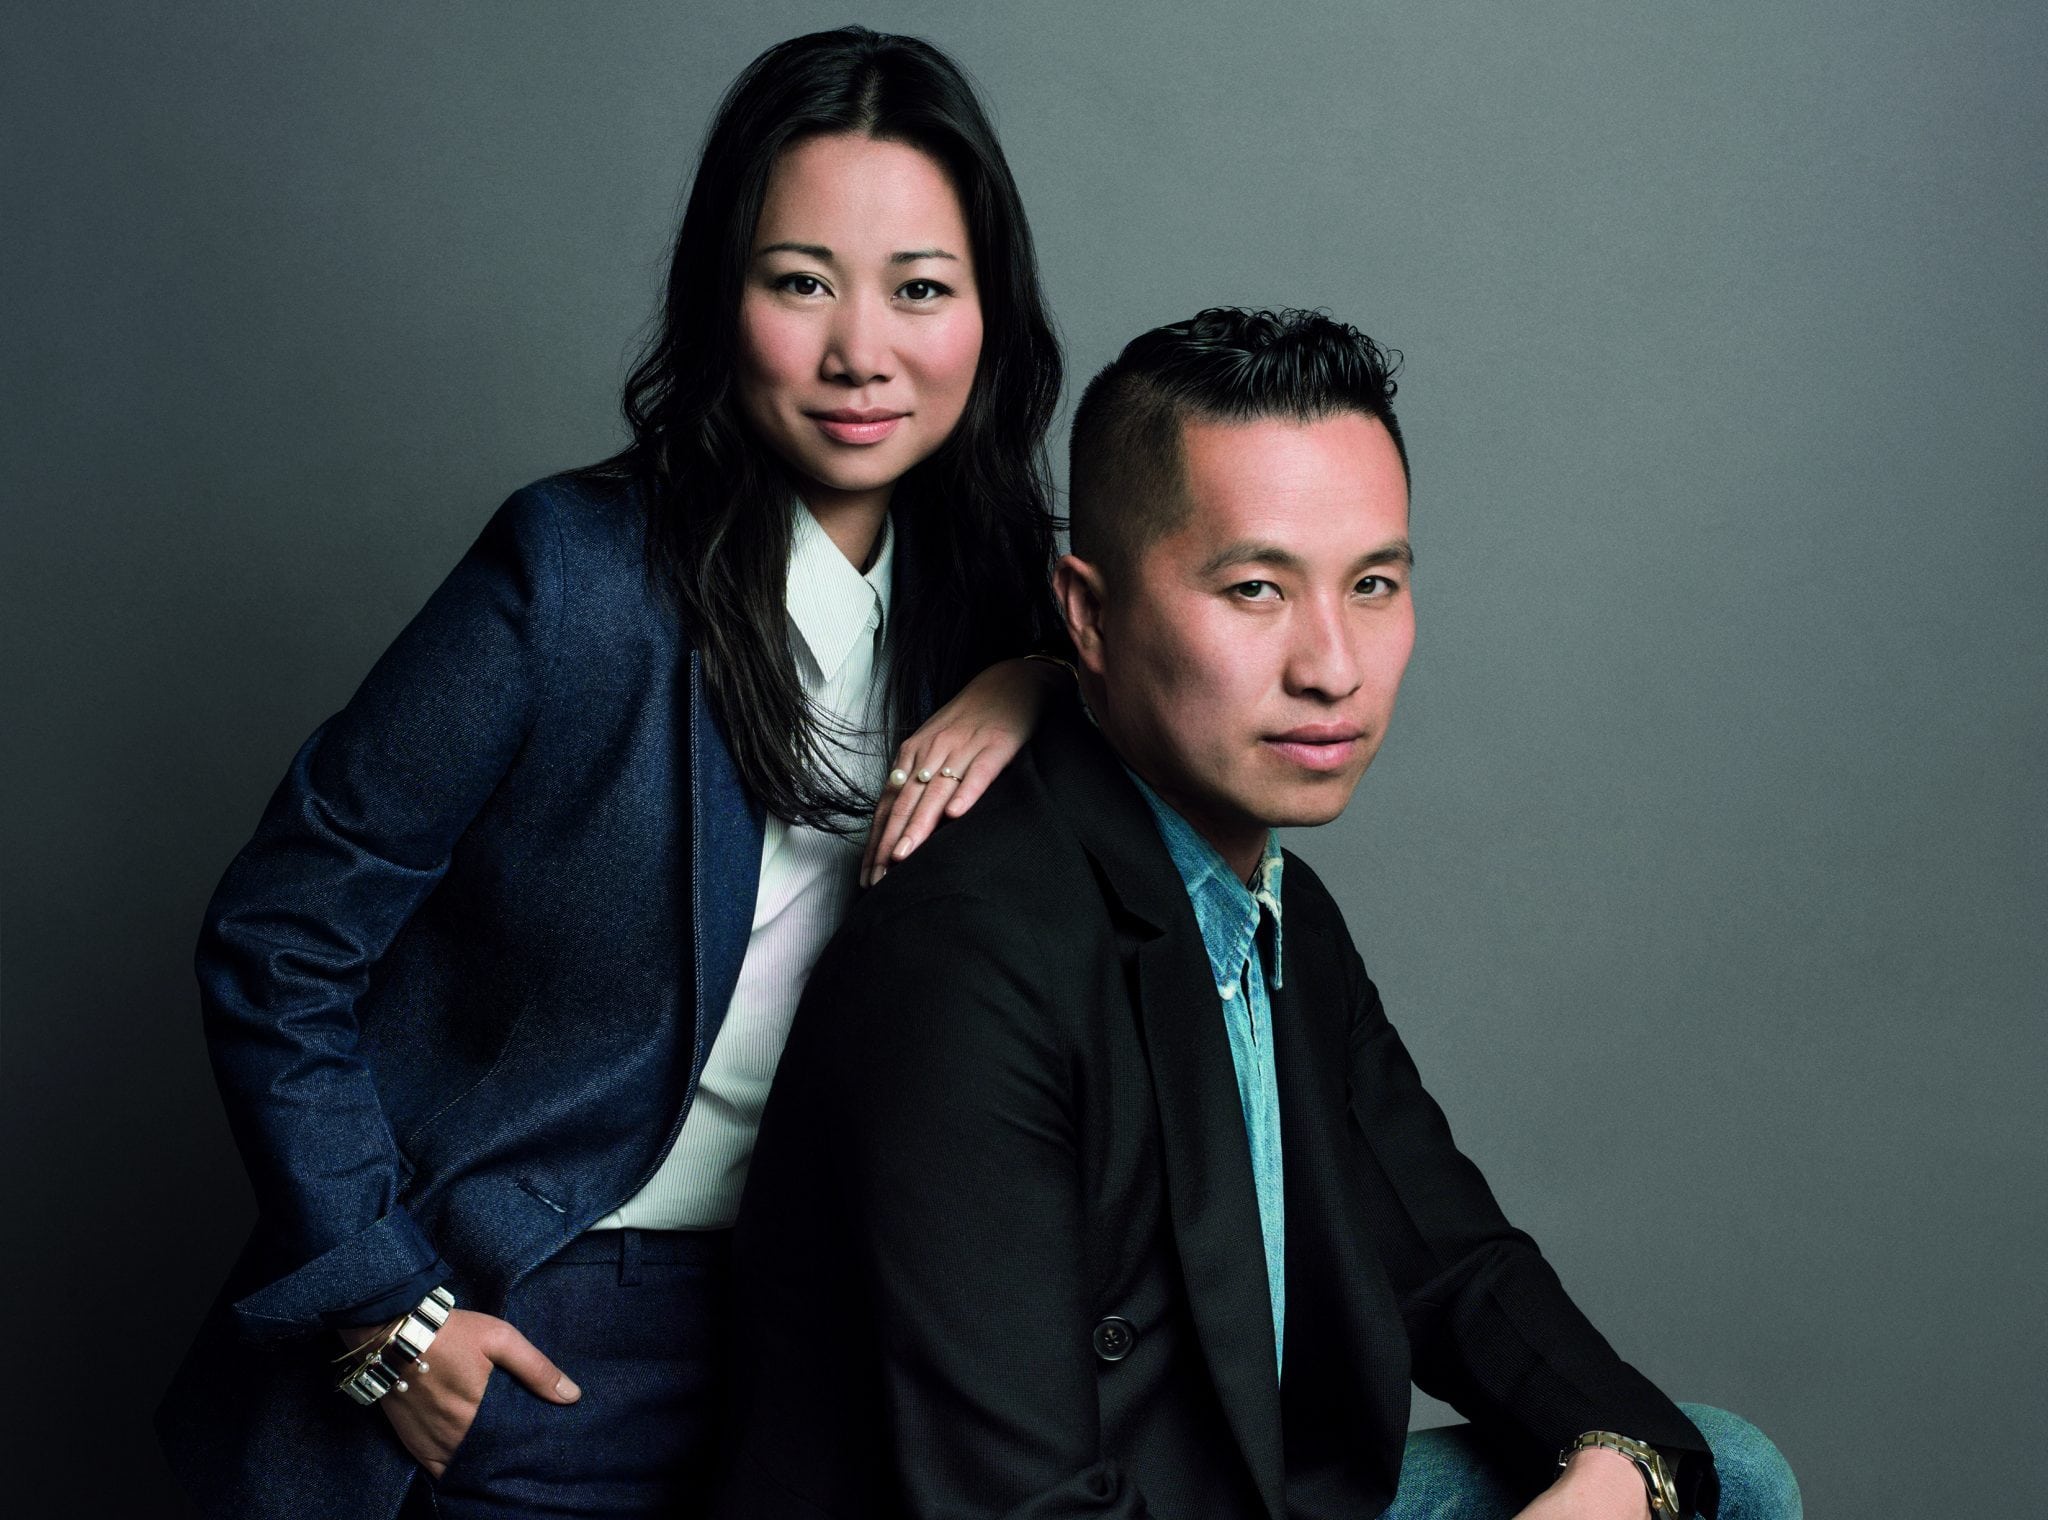 CEO of 3.1 Phillip Lim on Why Moving Slow is the Way to Go in